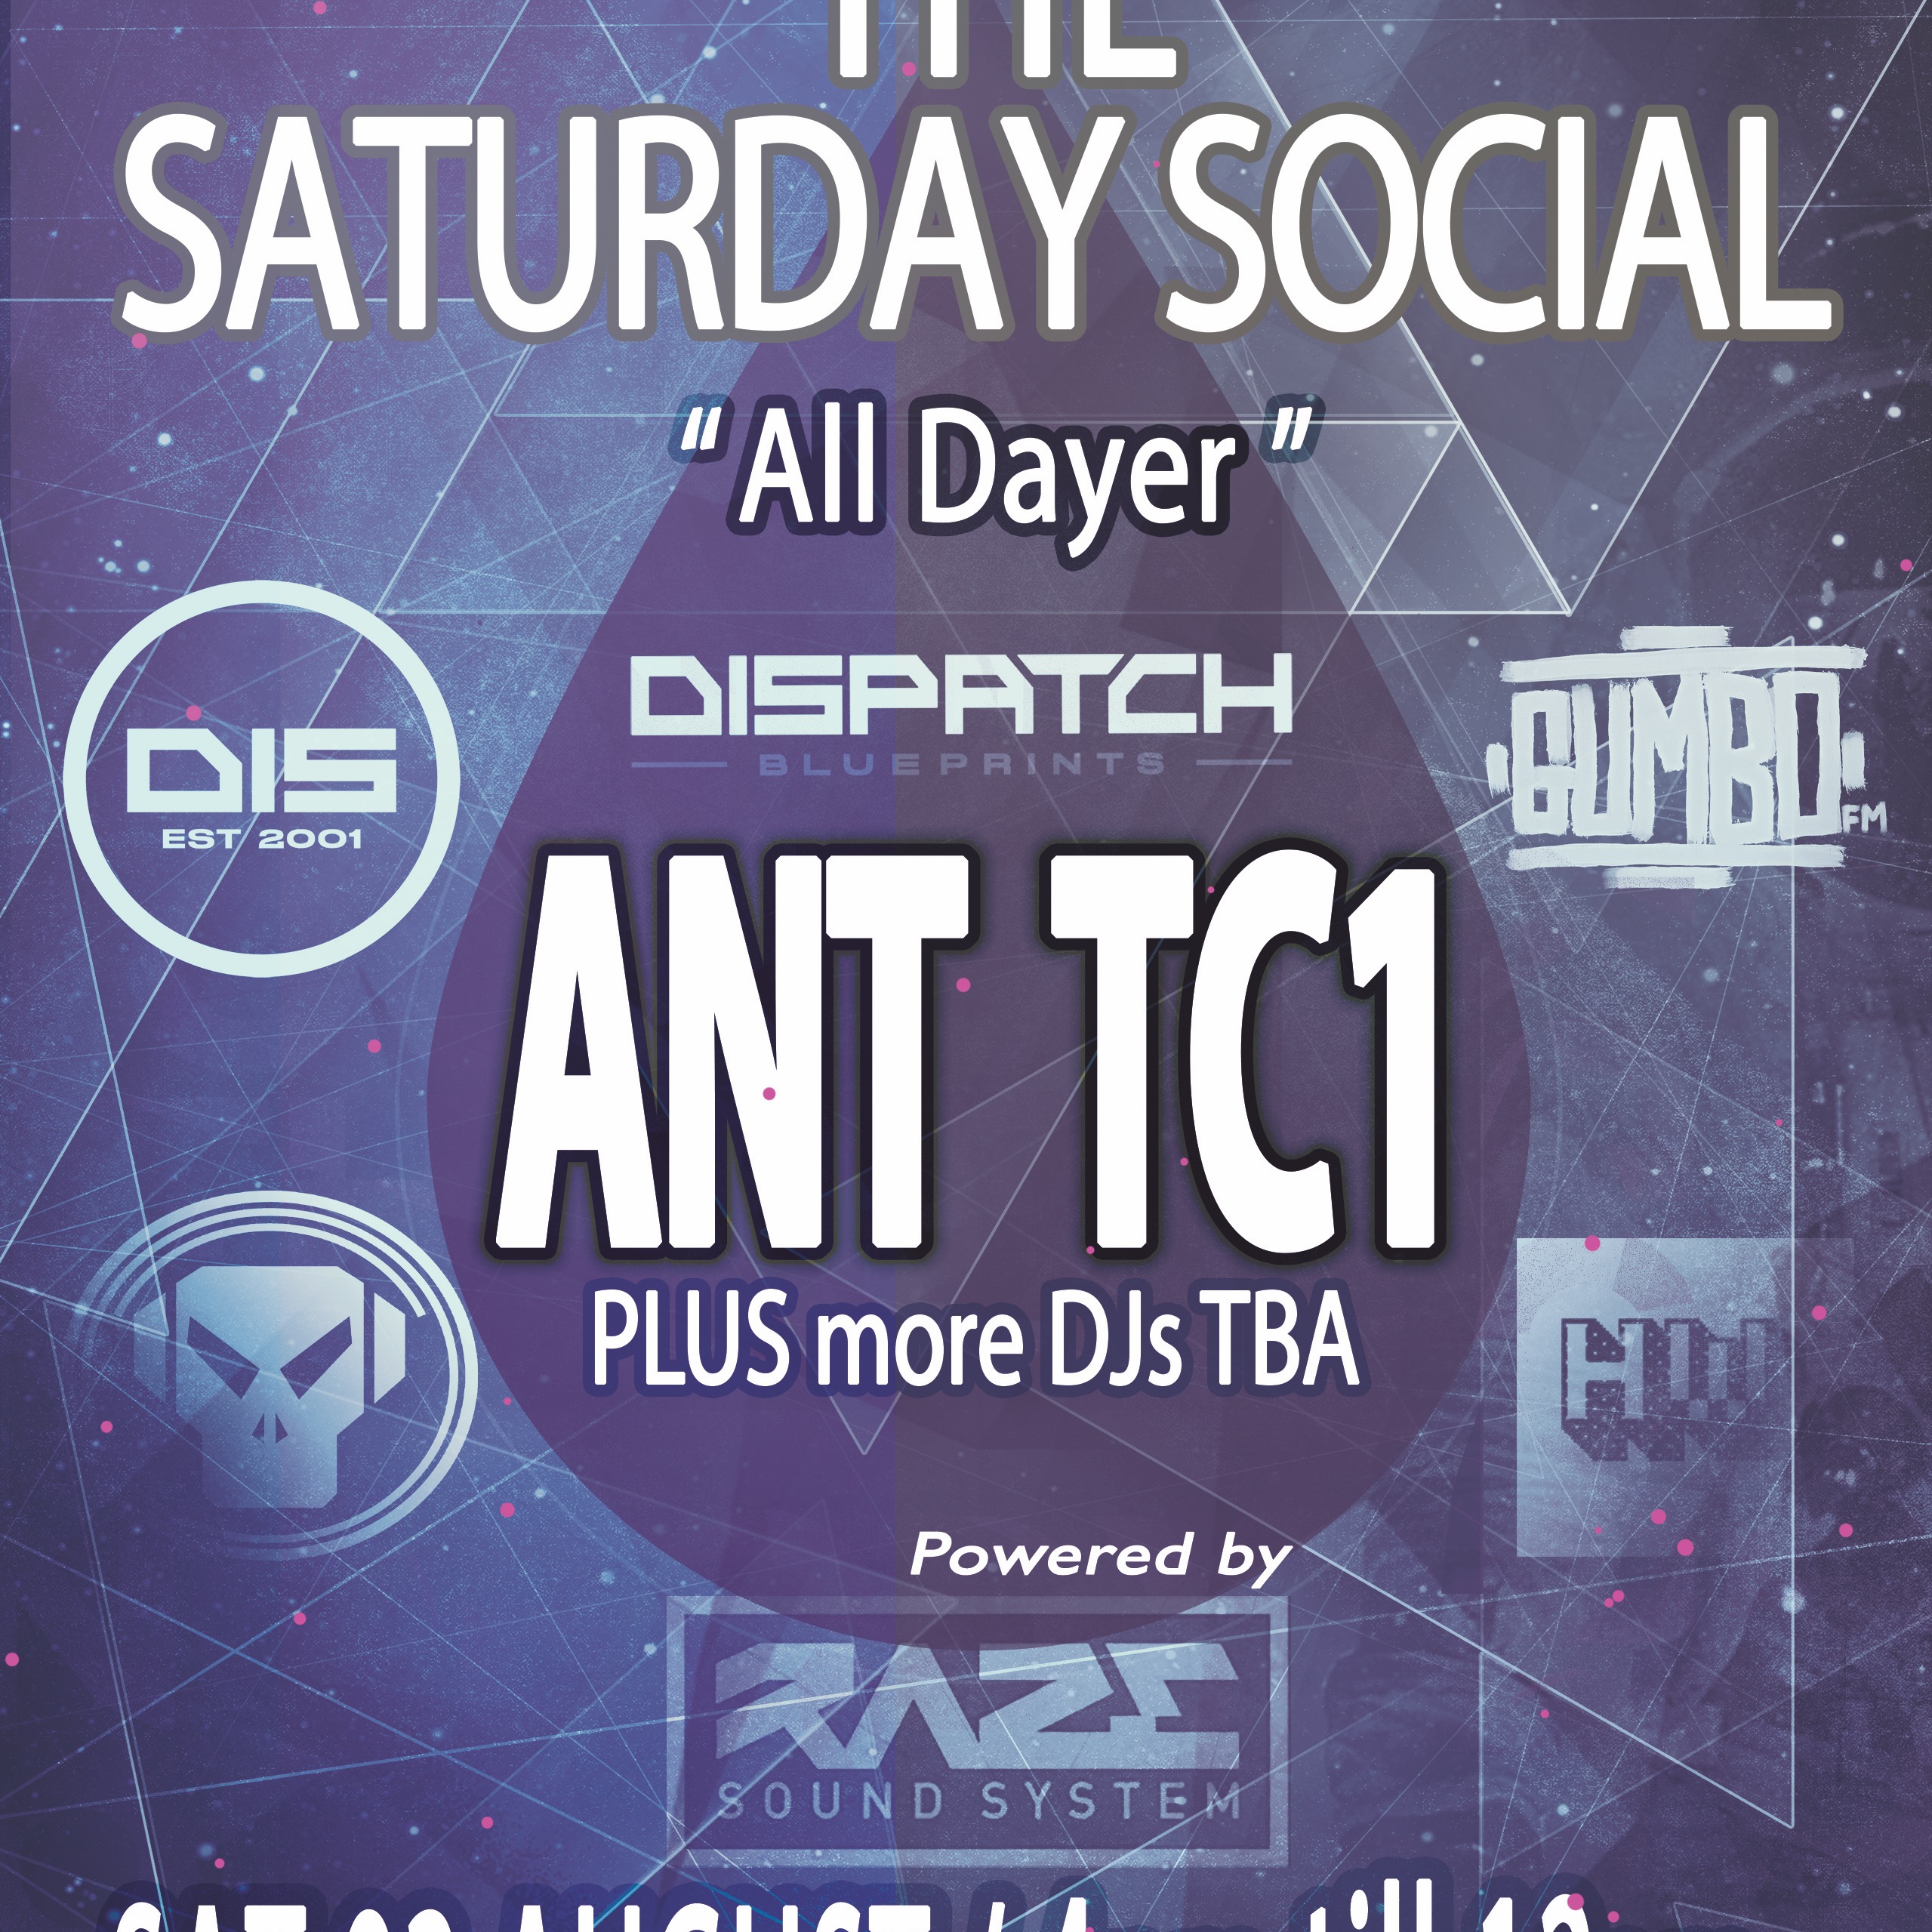 Saturday Social All Dayer ft Ant TC1, Charla Green, Displace, TK, DJ Stav, Lo Shea, Lunar and many more